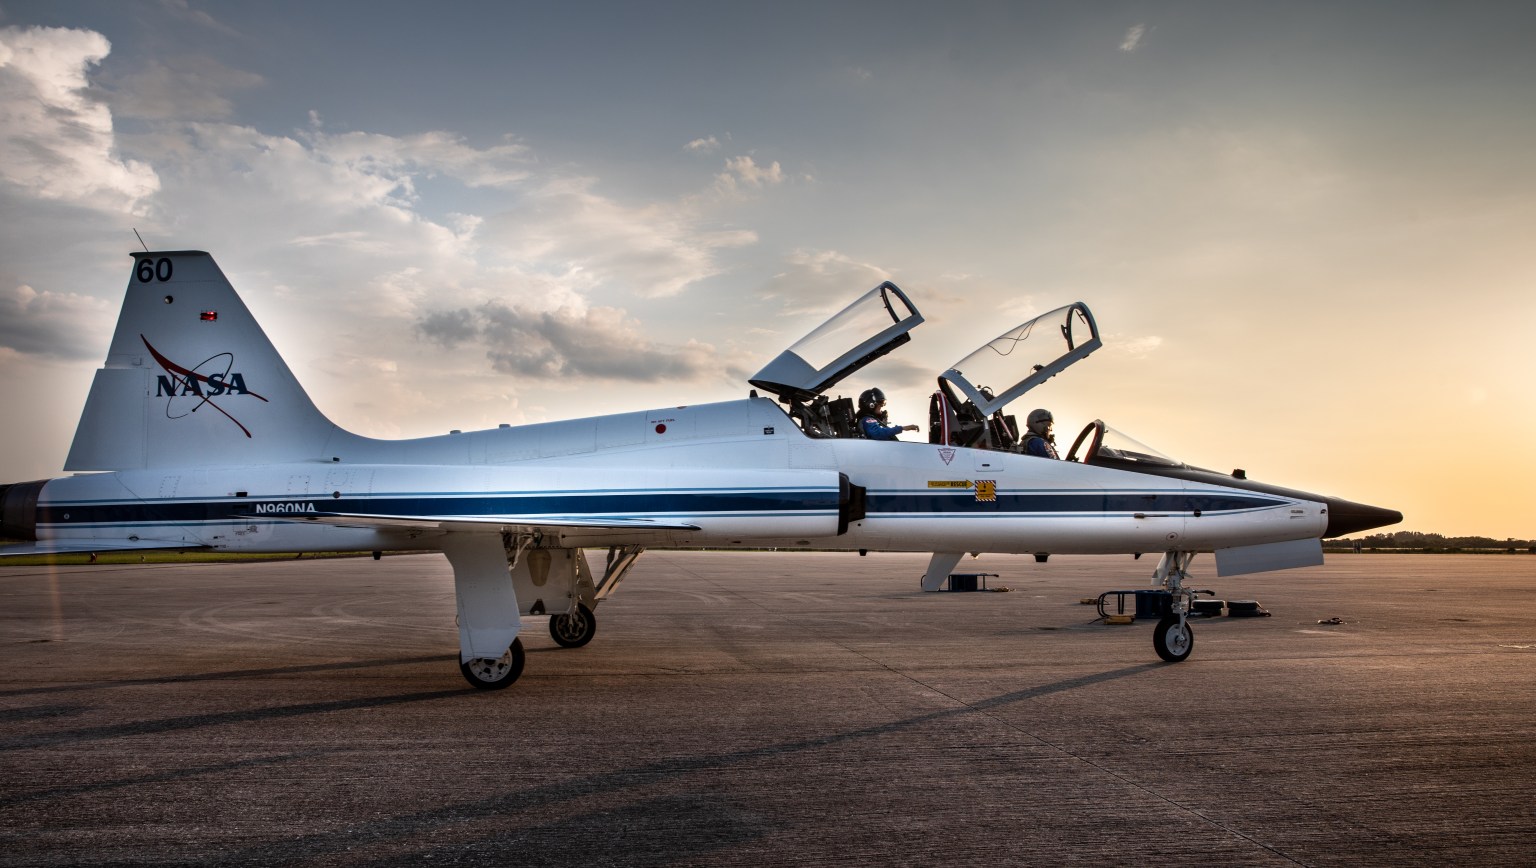 A NASA training jet, white with blue trim, is seen with its two cockpit windows open against the Florida sky at dusk.